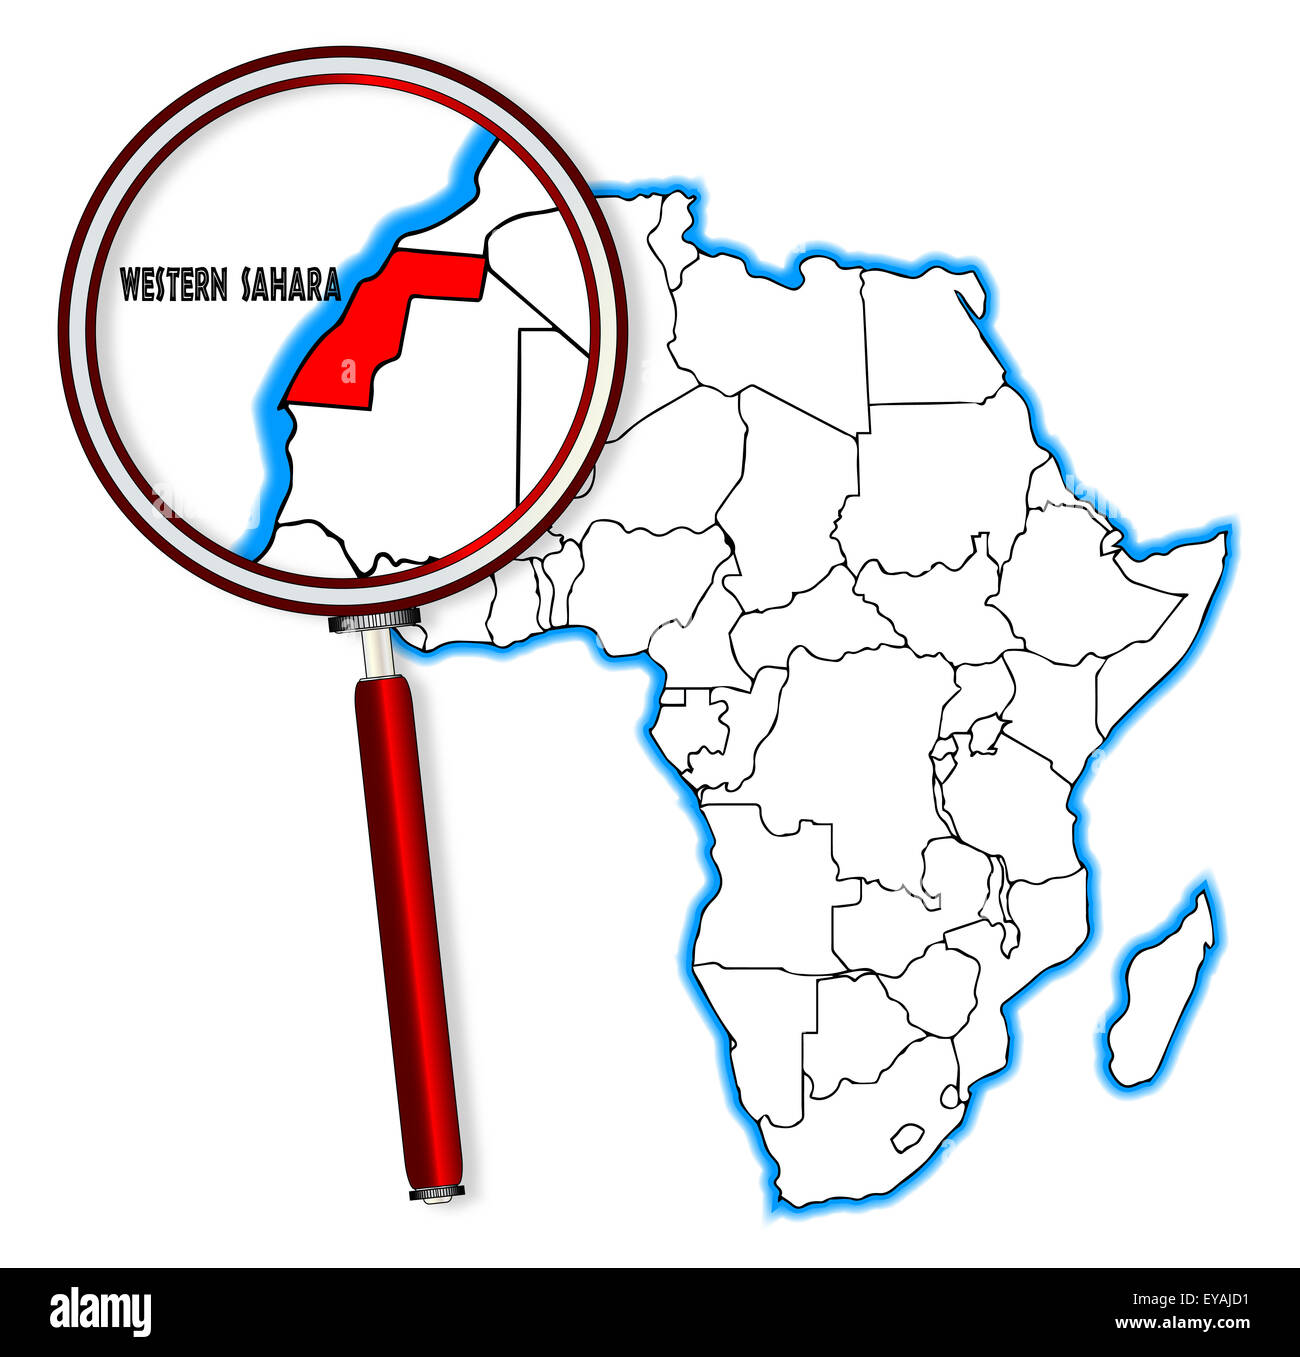 Western Sahara outline inset into a map of Africa over a white background Stock Photo